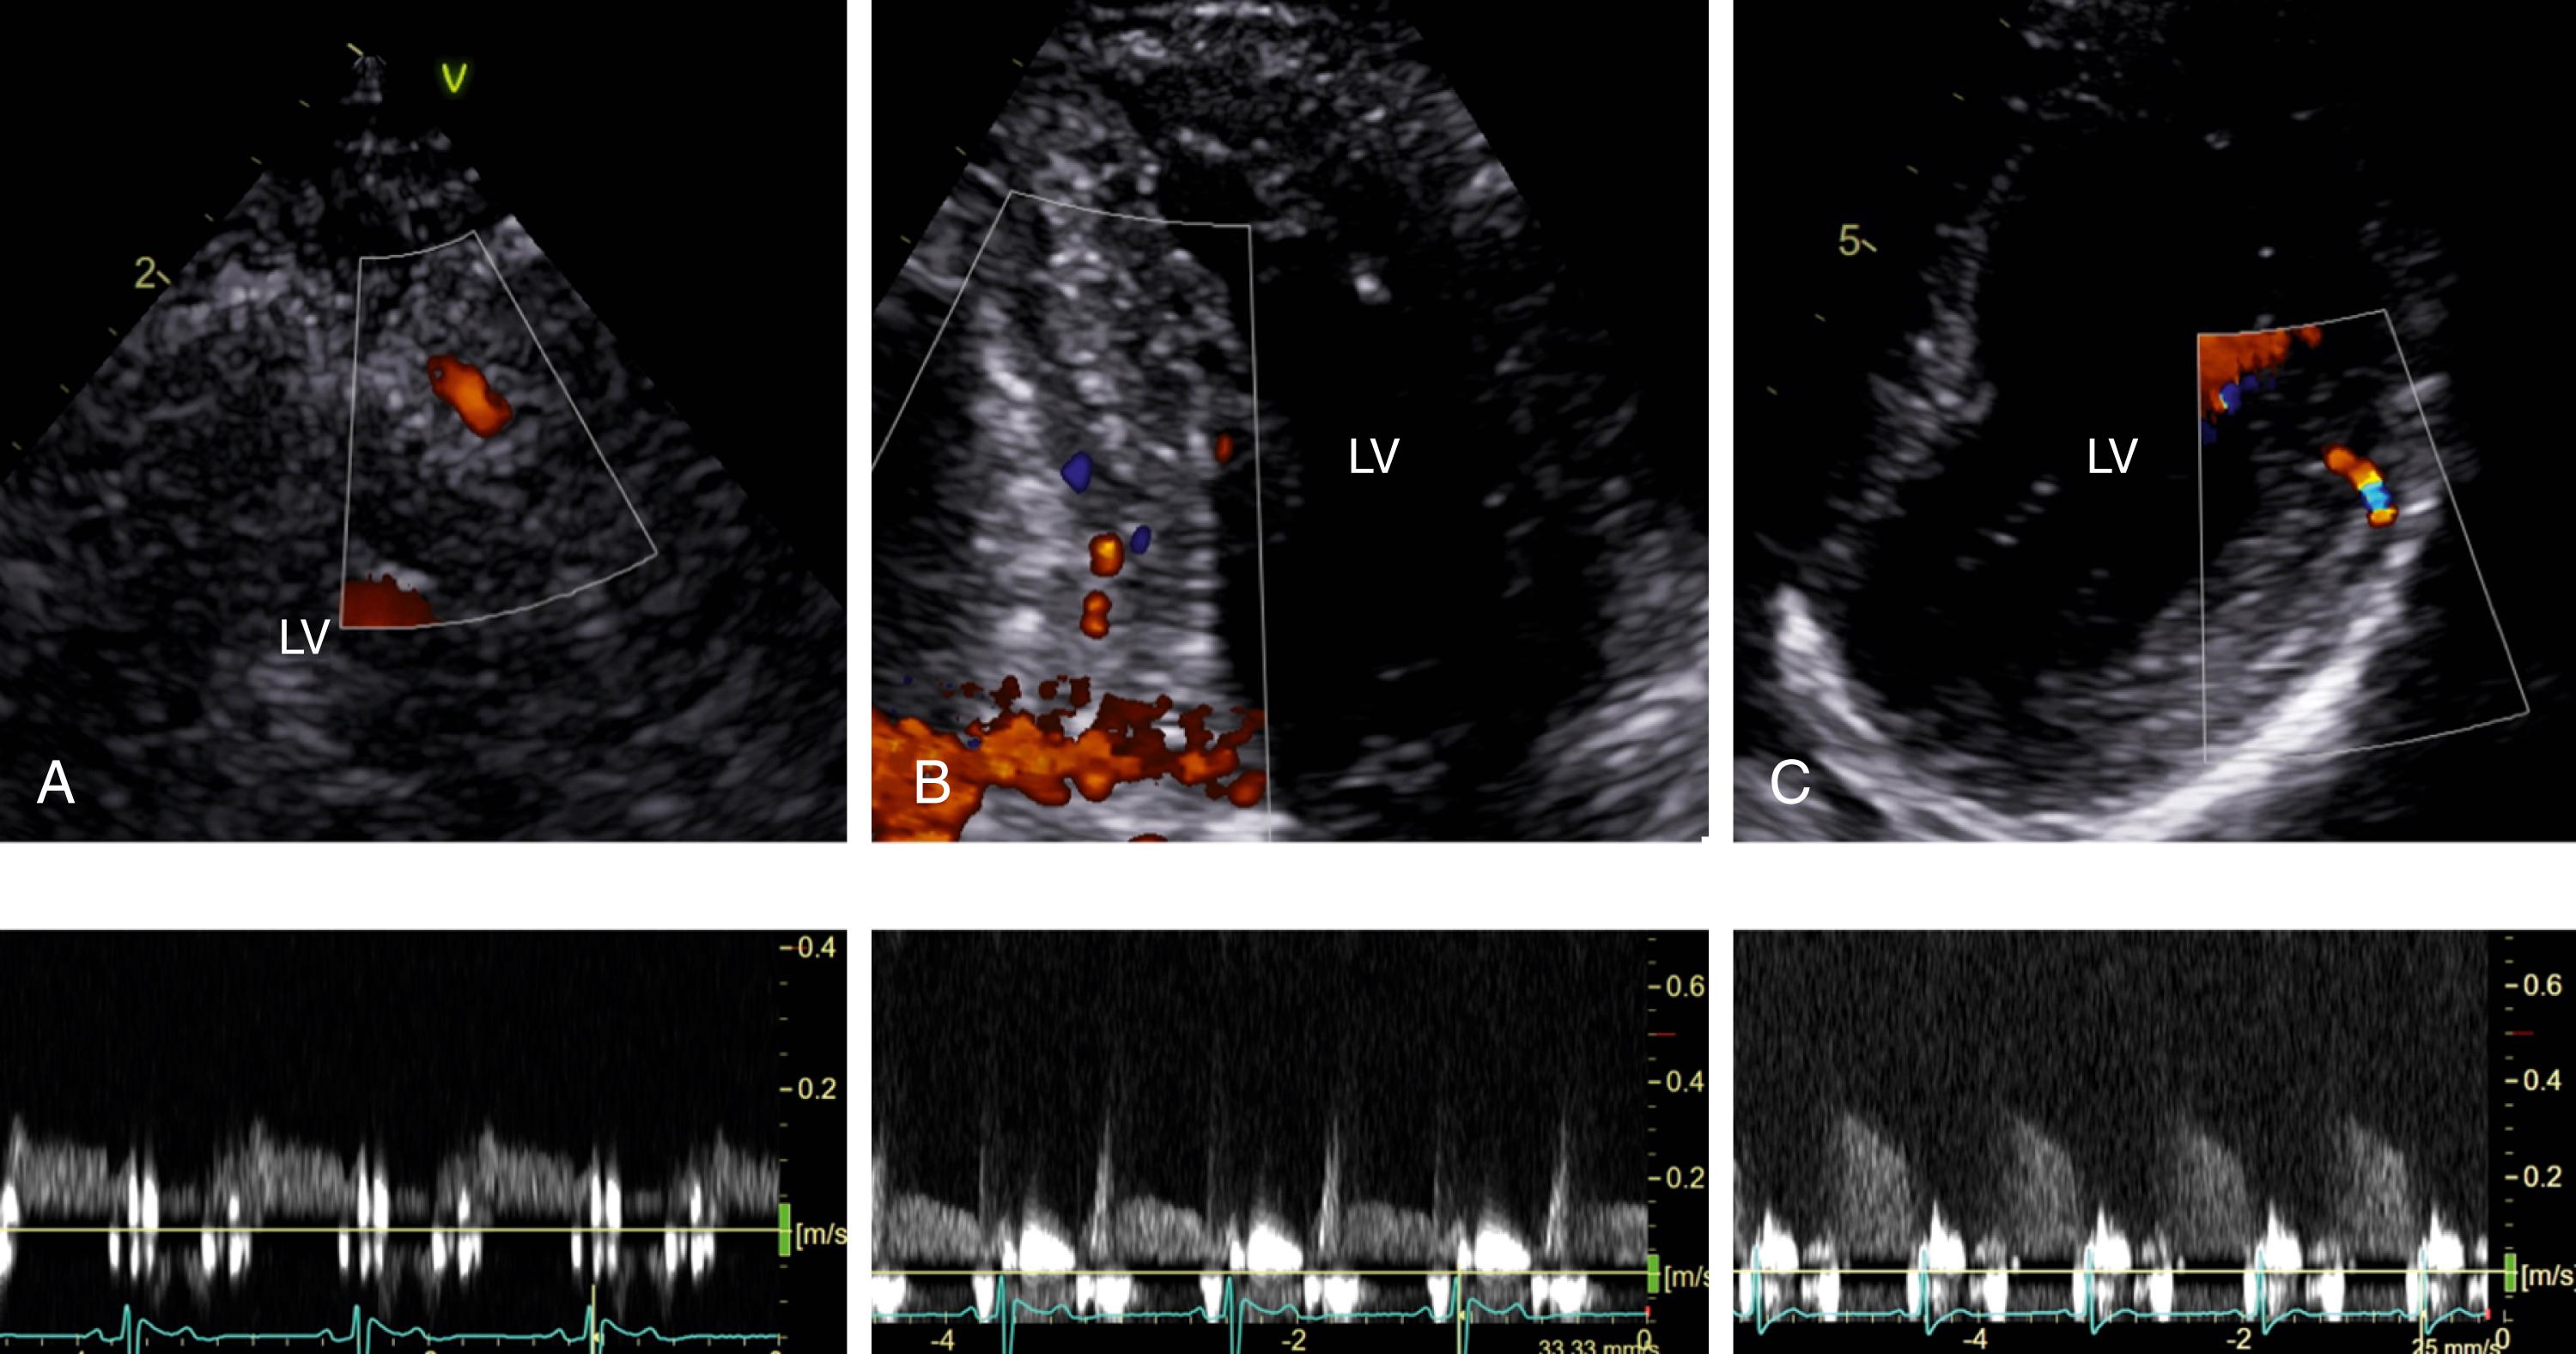 Figure 48.1, Coronary flow recordings. A, Coronary flow in the distal portion of the left anterior descending coronary artery. B, Coronary flow in the posterior descending coronary artery. This is an off-axis two-chamber view. C, Coronary flow in the left circumflex coronary artery. This is an off-axis four-chamber view. LV, Left ventricle. (See Video 48.1A , Video 48.1B , Video 48.1C .)